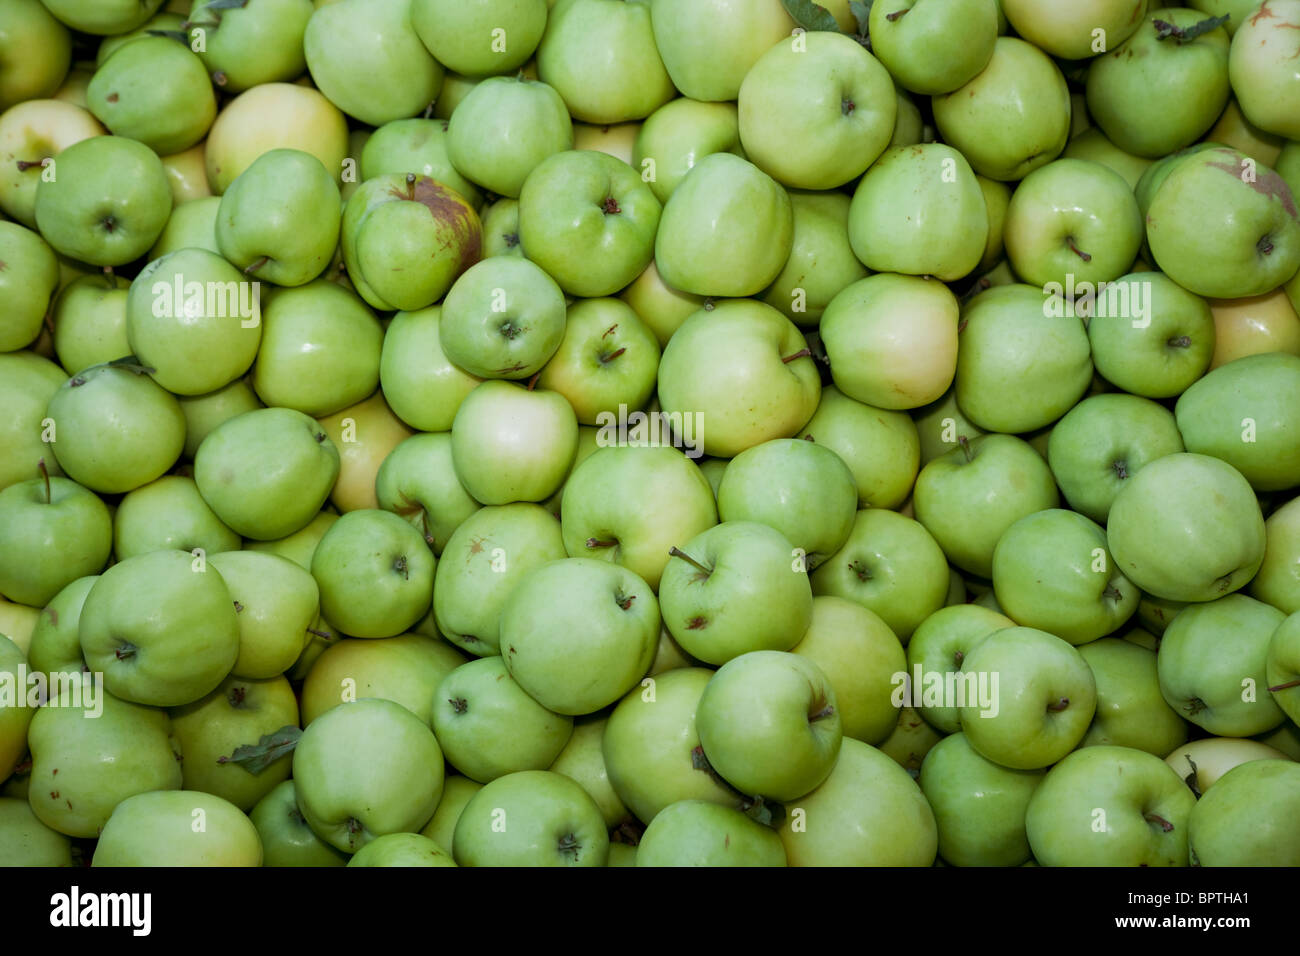 Apple close up for background Stock Photo